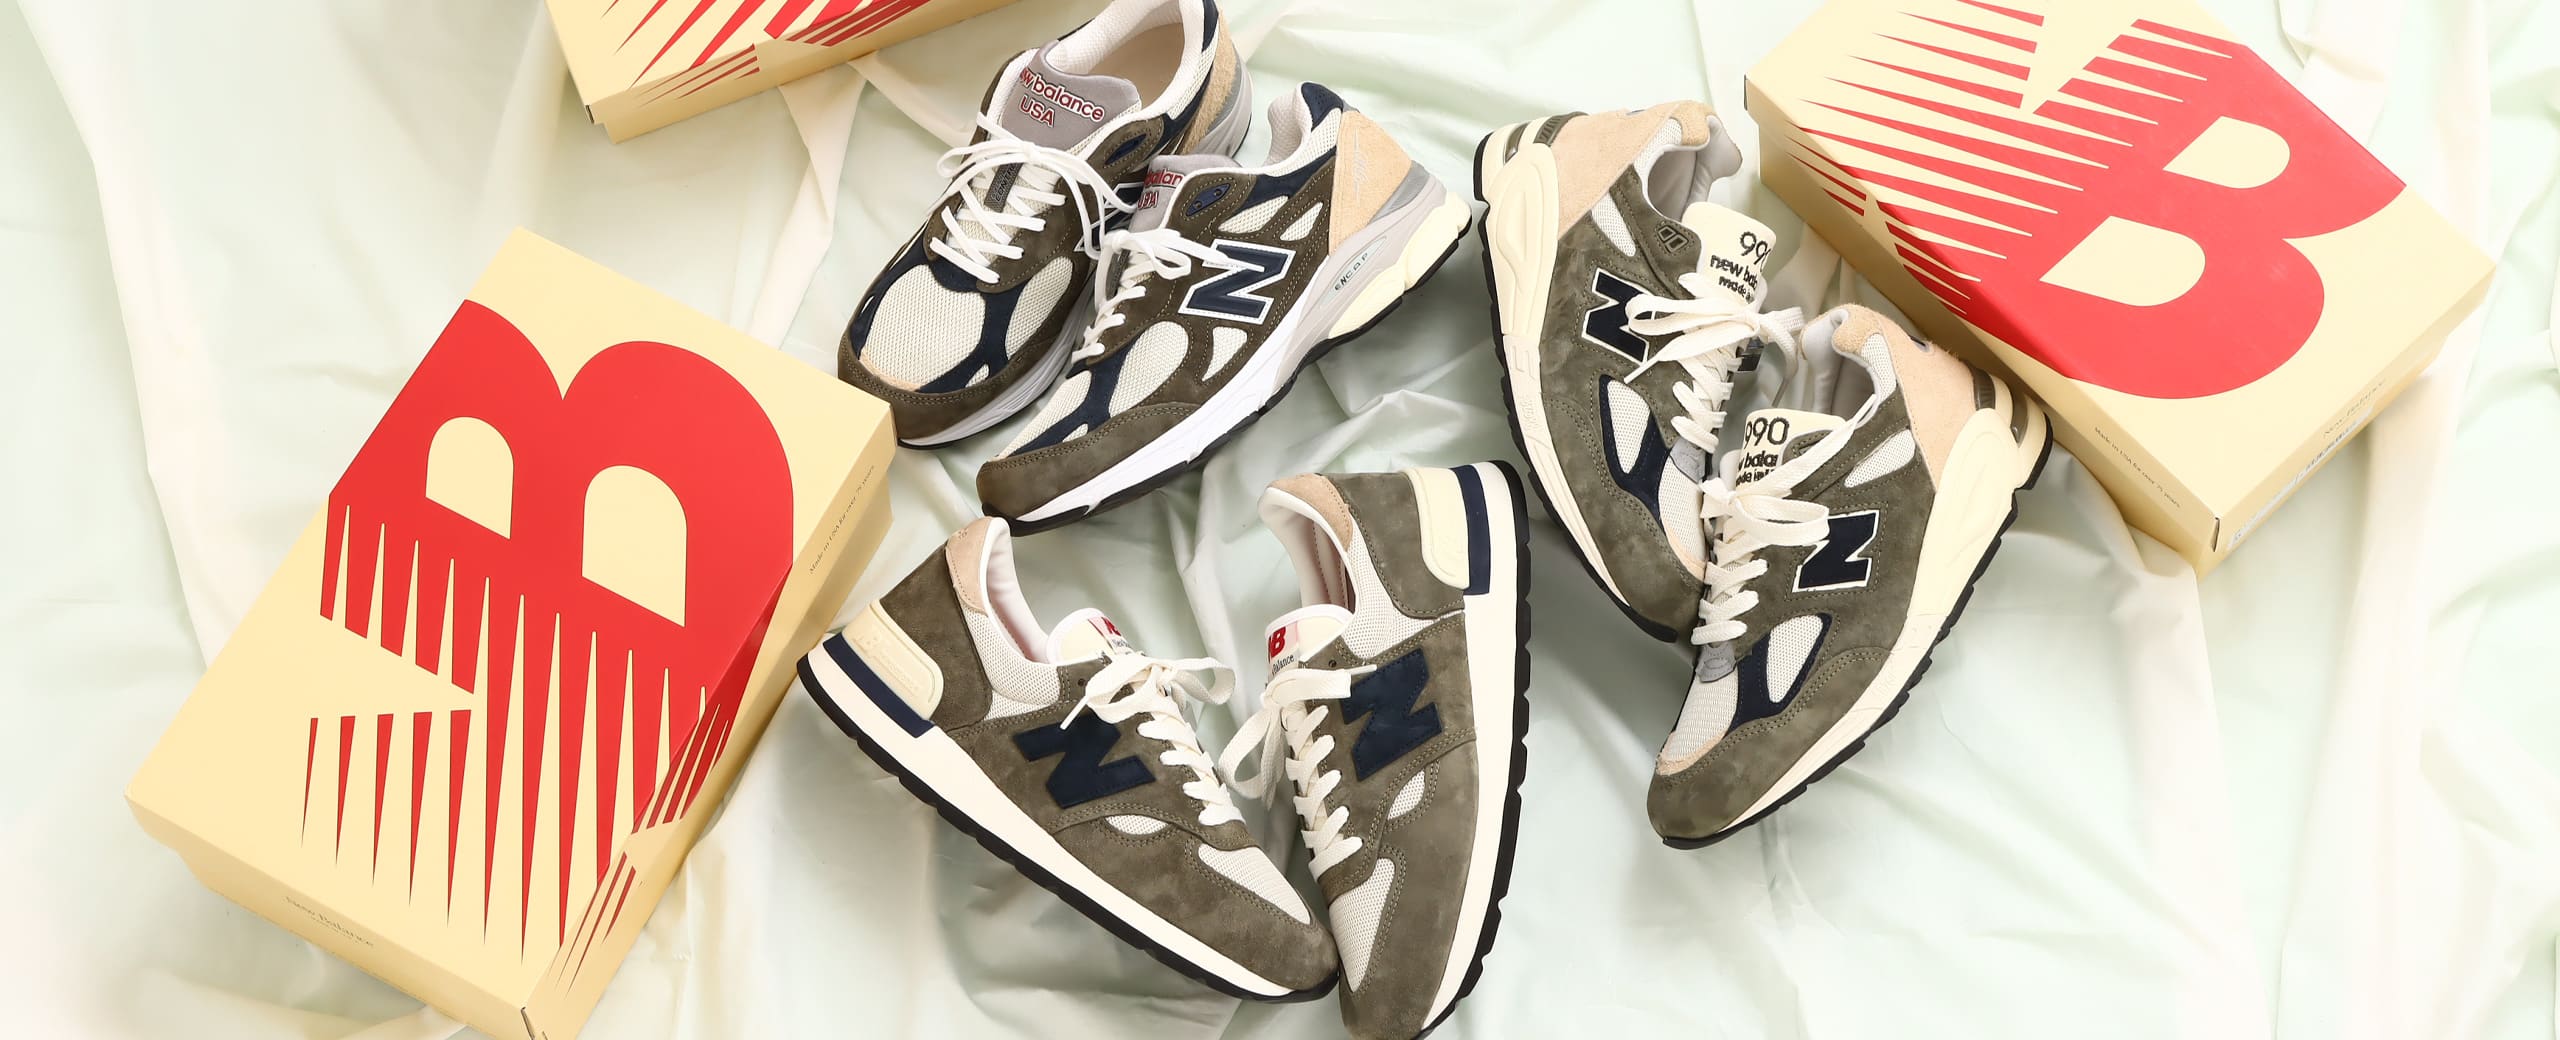 "New Balance M990 NEW COLLECTION"